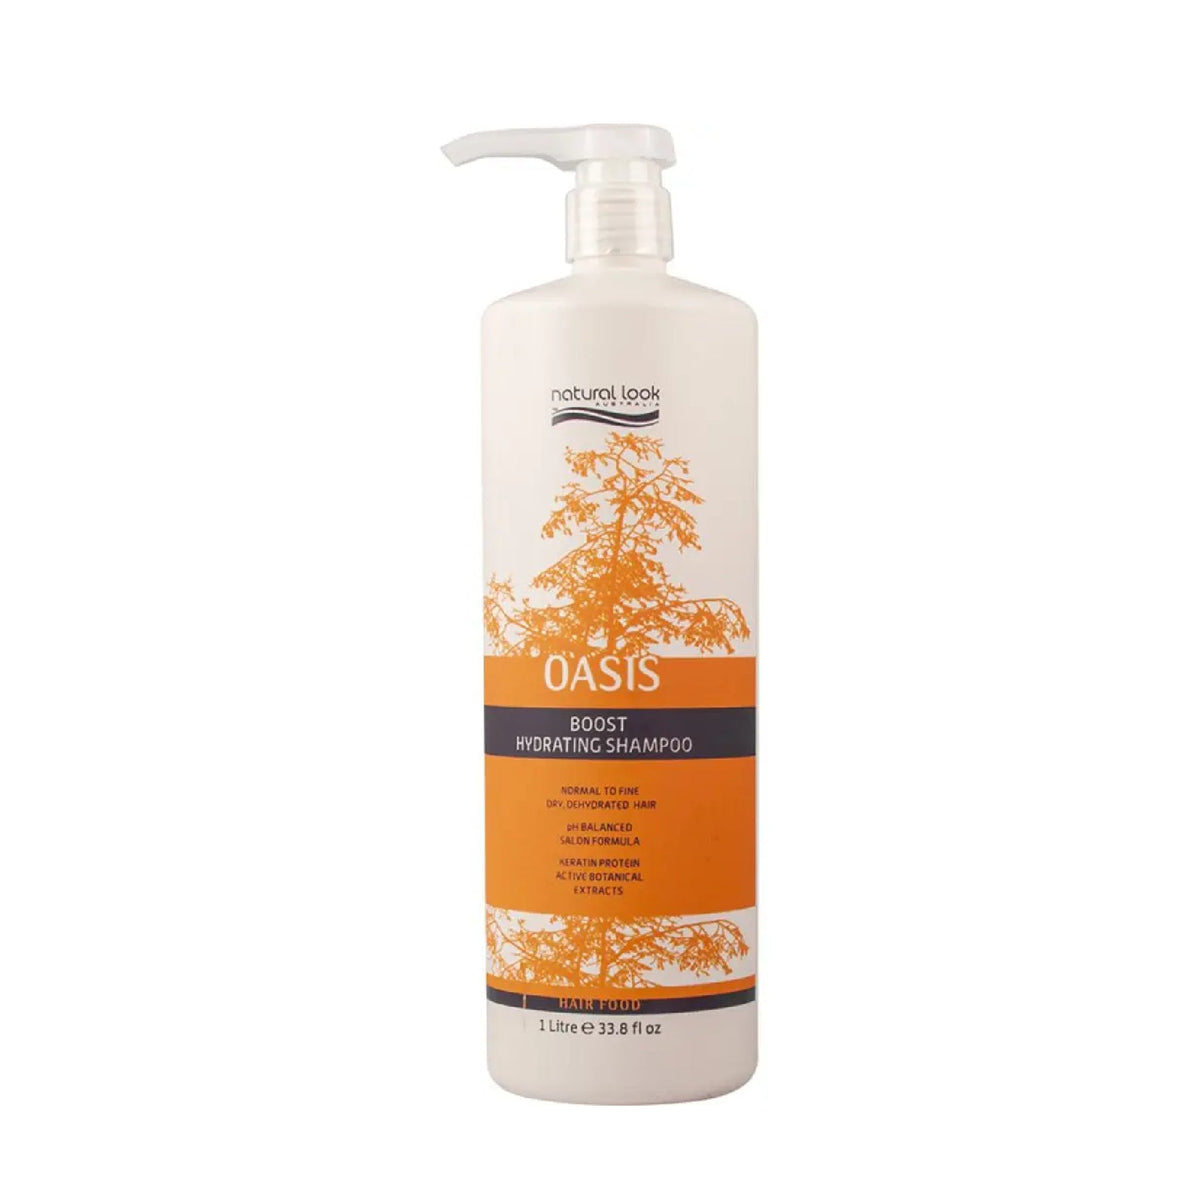 Natural Look Oasis Boost Moisturising Shampoo 1Ltr - Haircare Superstore